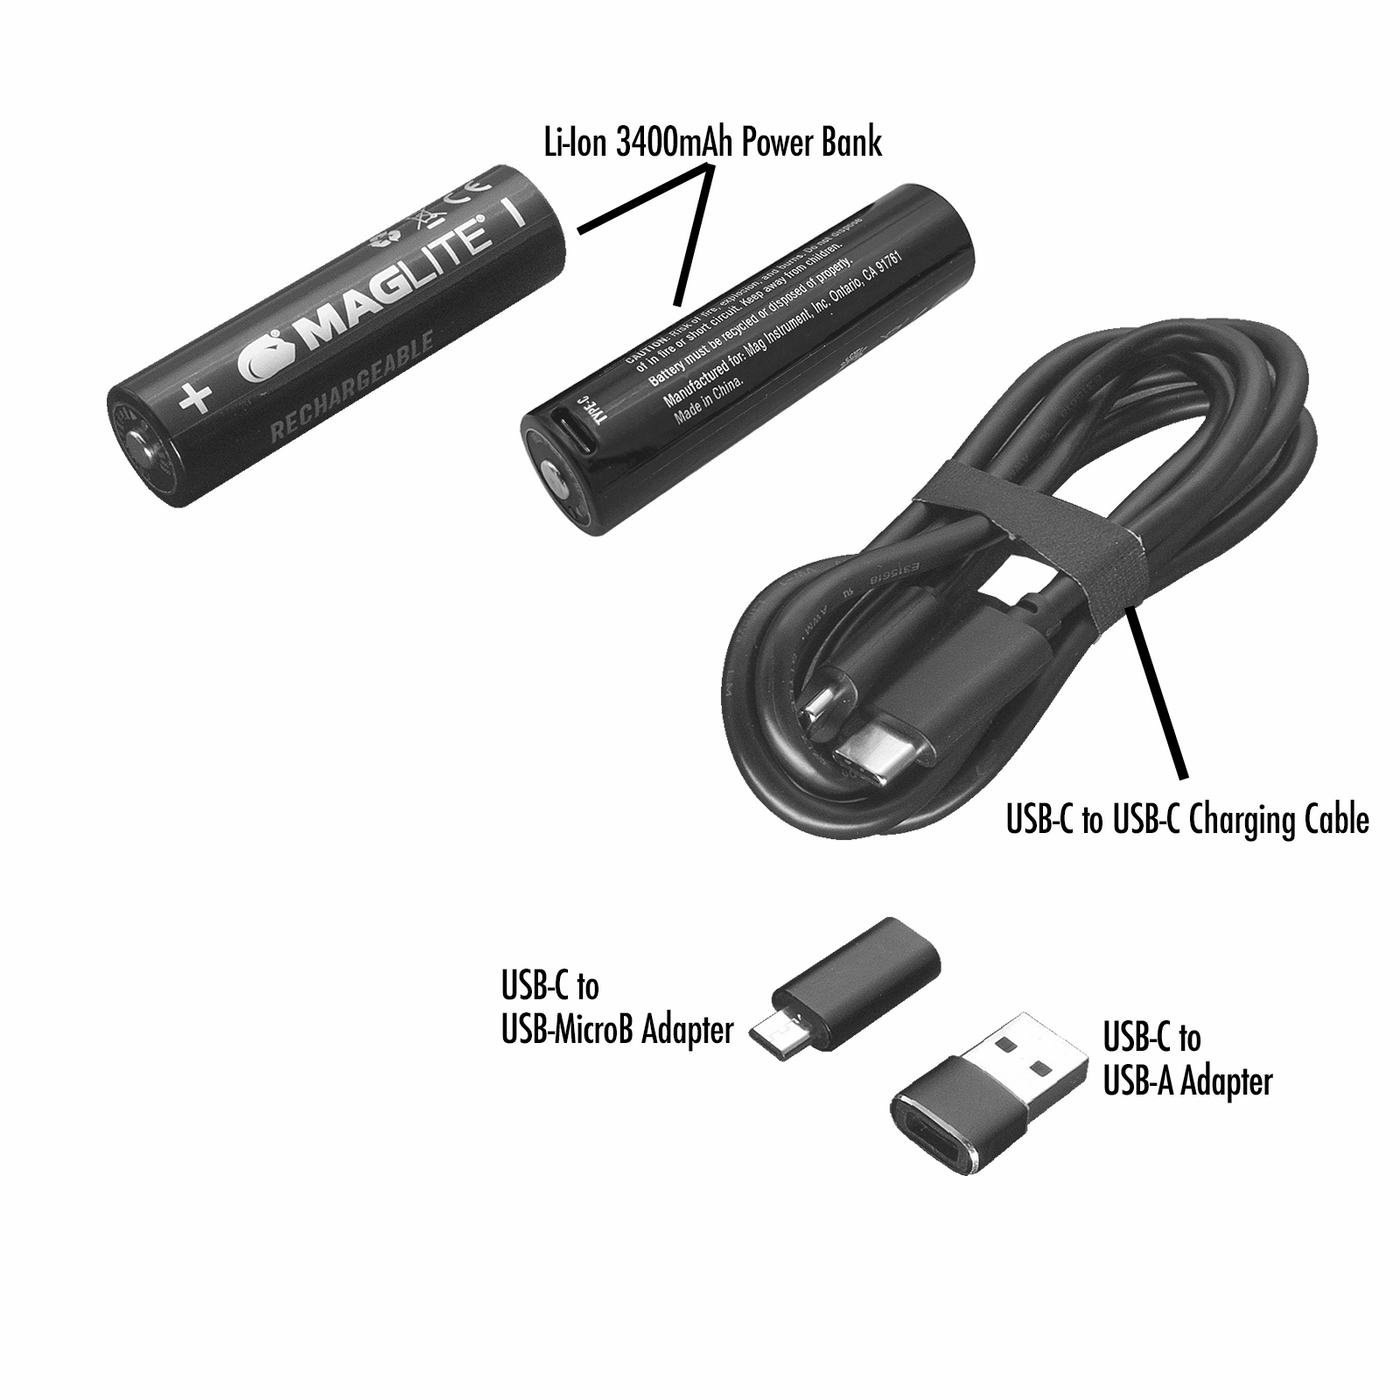 MAG CHARGER® AX64338 – Maglite